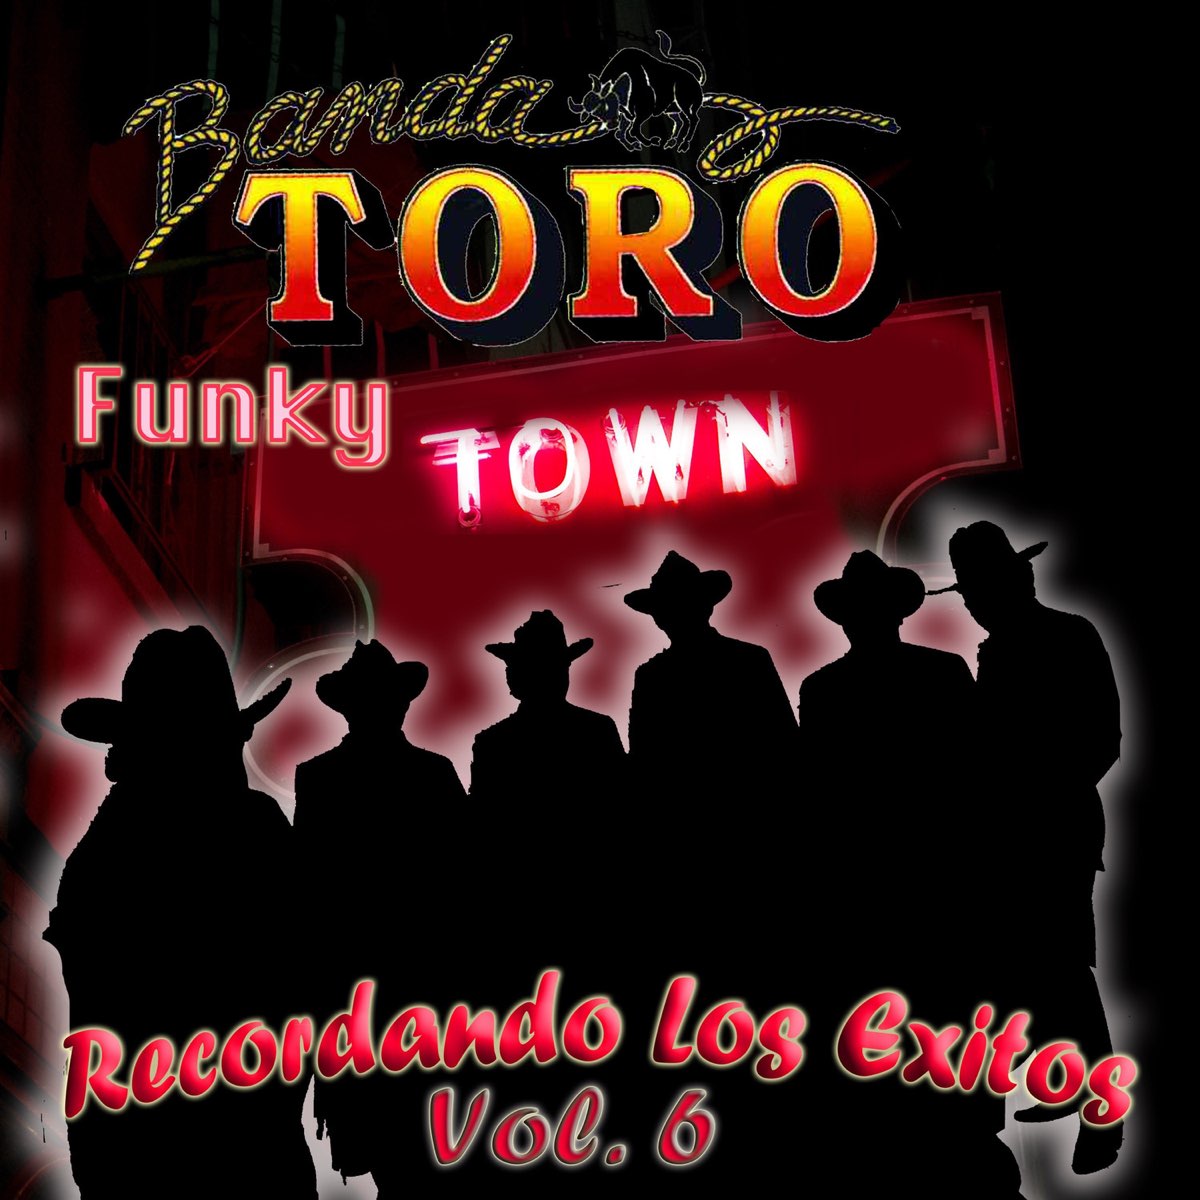 Funky Town видео. Funky town cartel